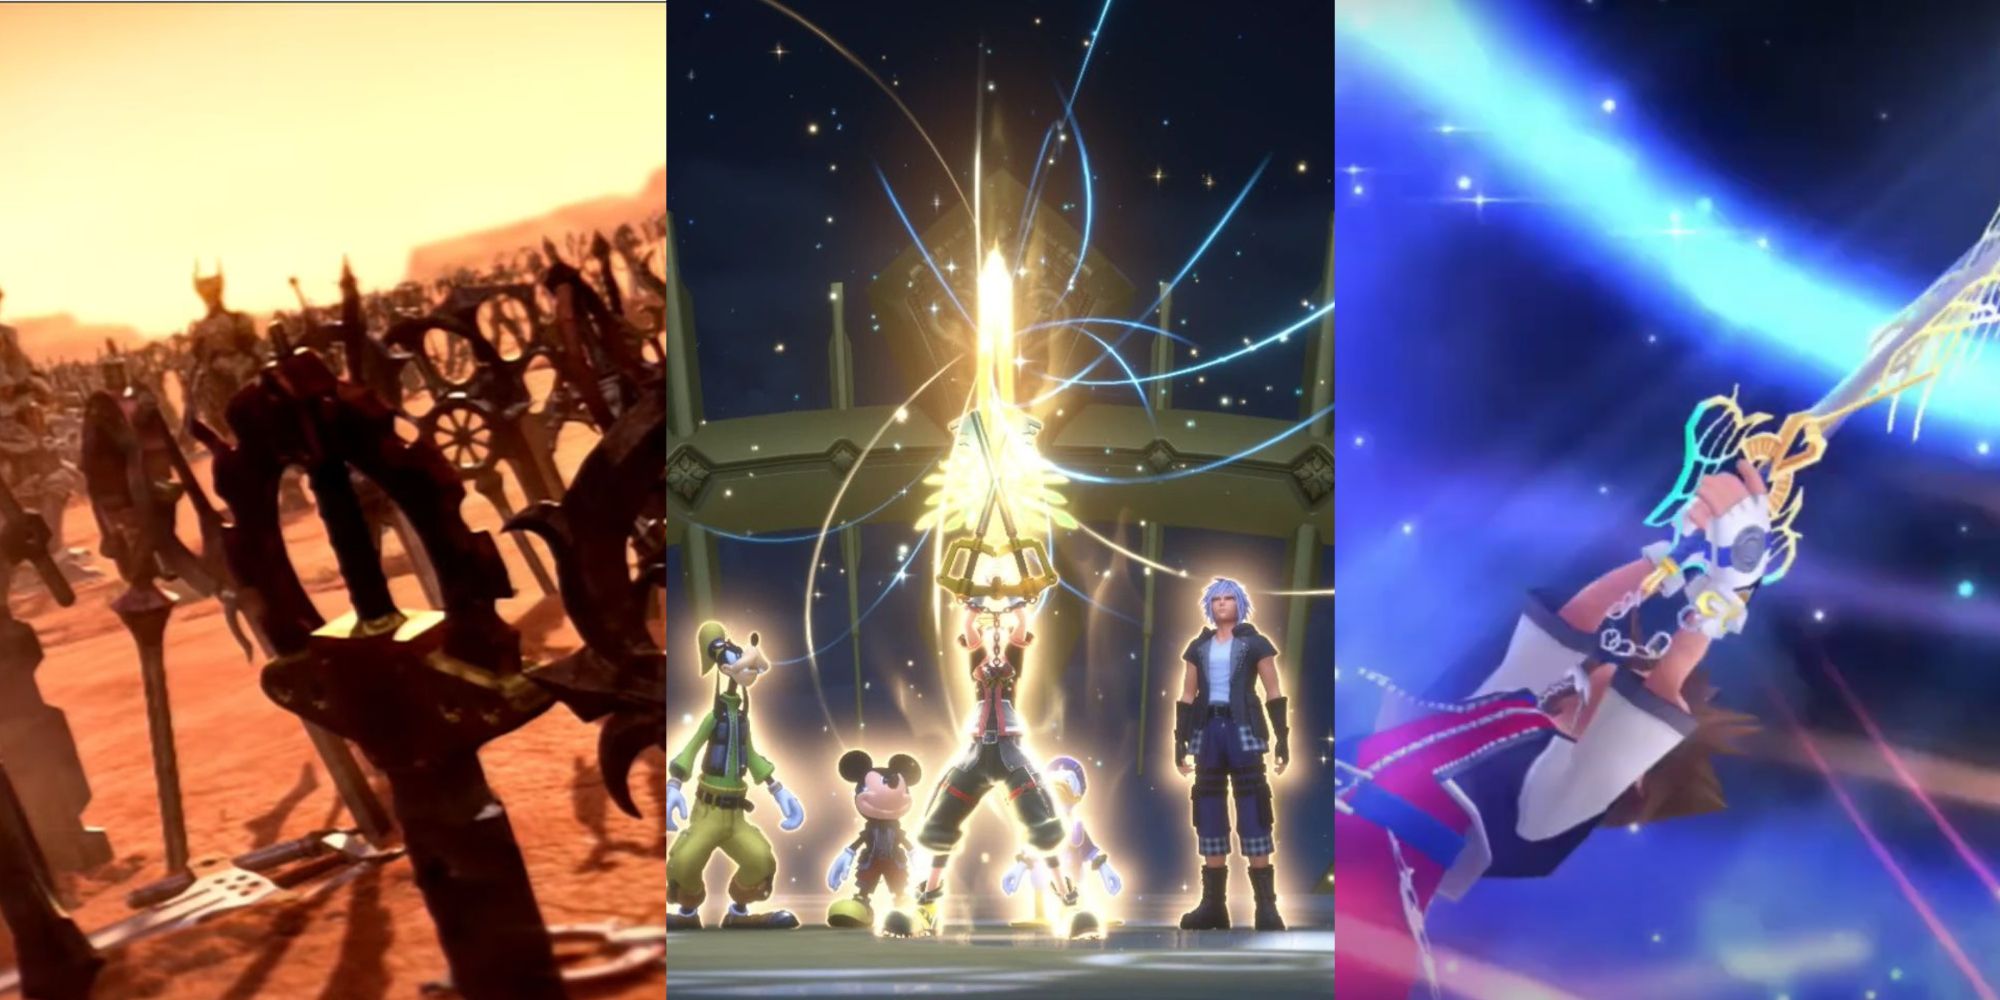 A cinematic of the Keyblade Graveyard, Sora and friends with the X-Blade, and Sora performing a summon with the Ultima Blade